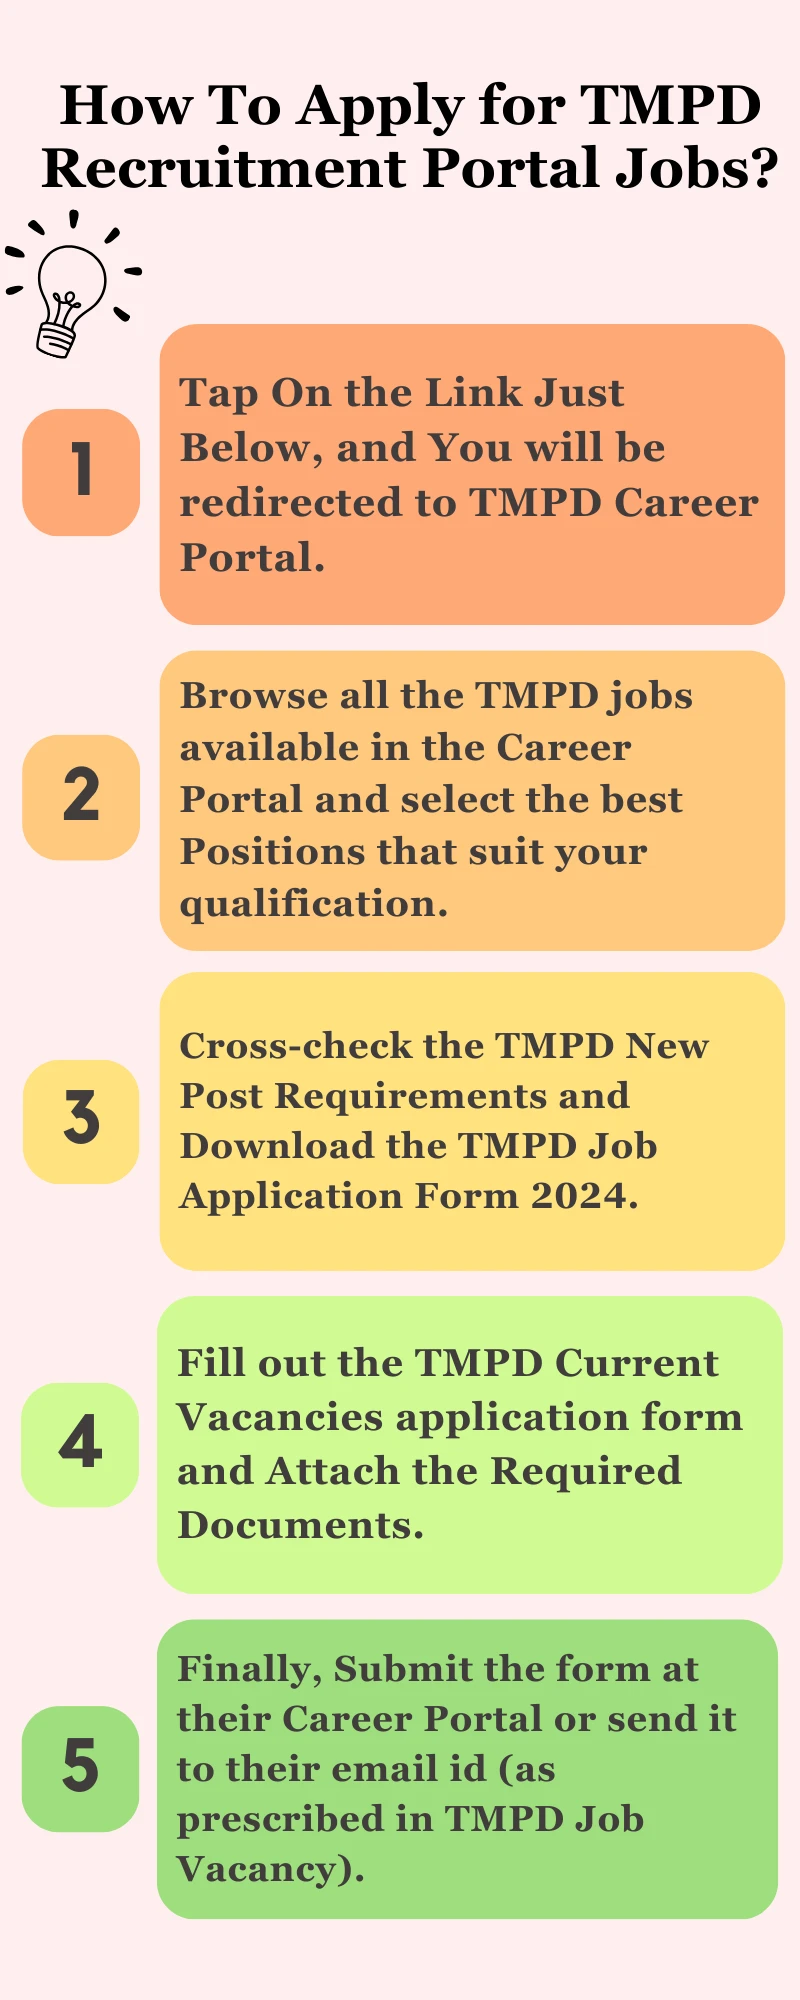 How To Apply for TMPD Recruitment Portal Jobs?